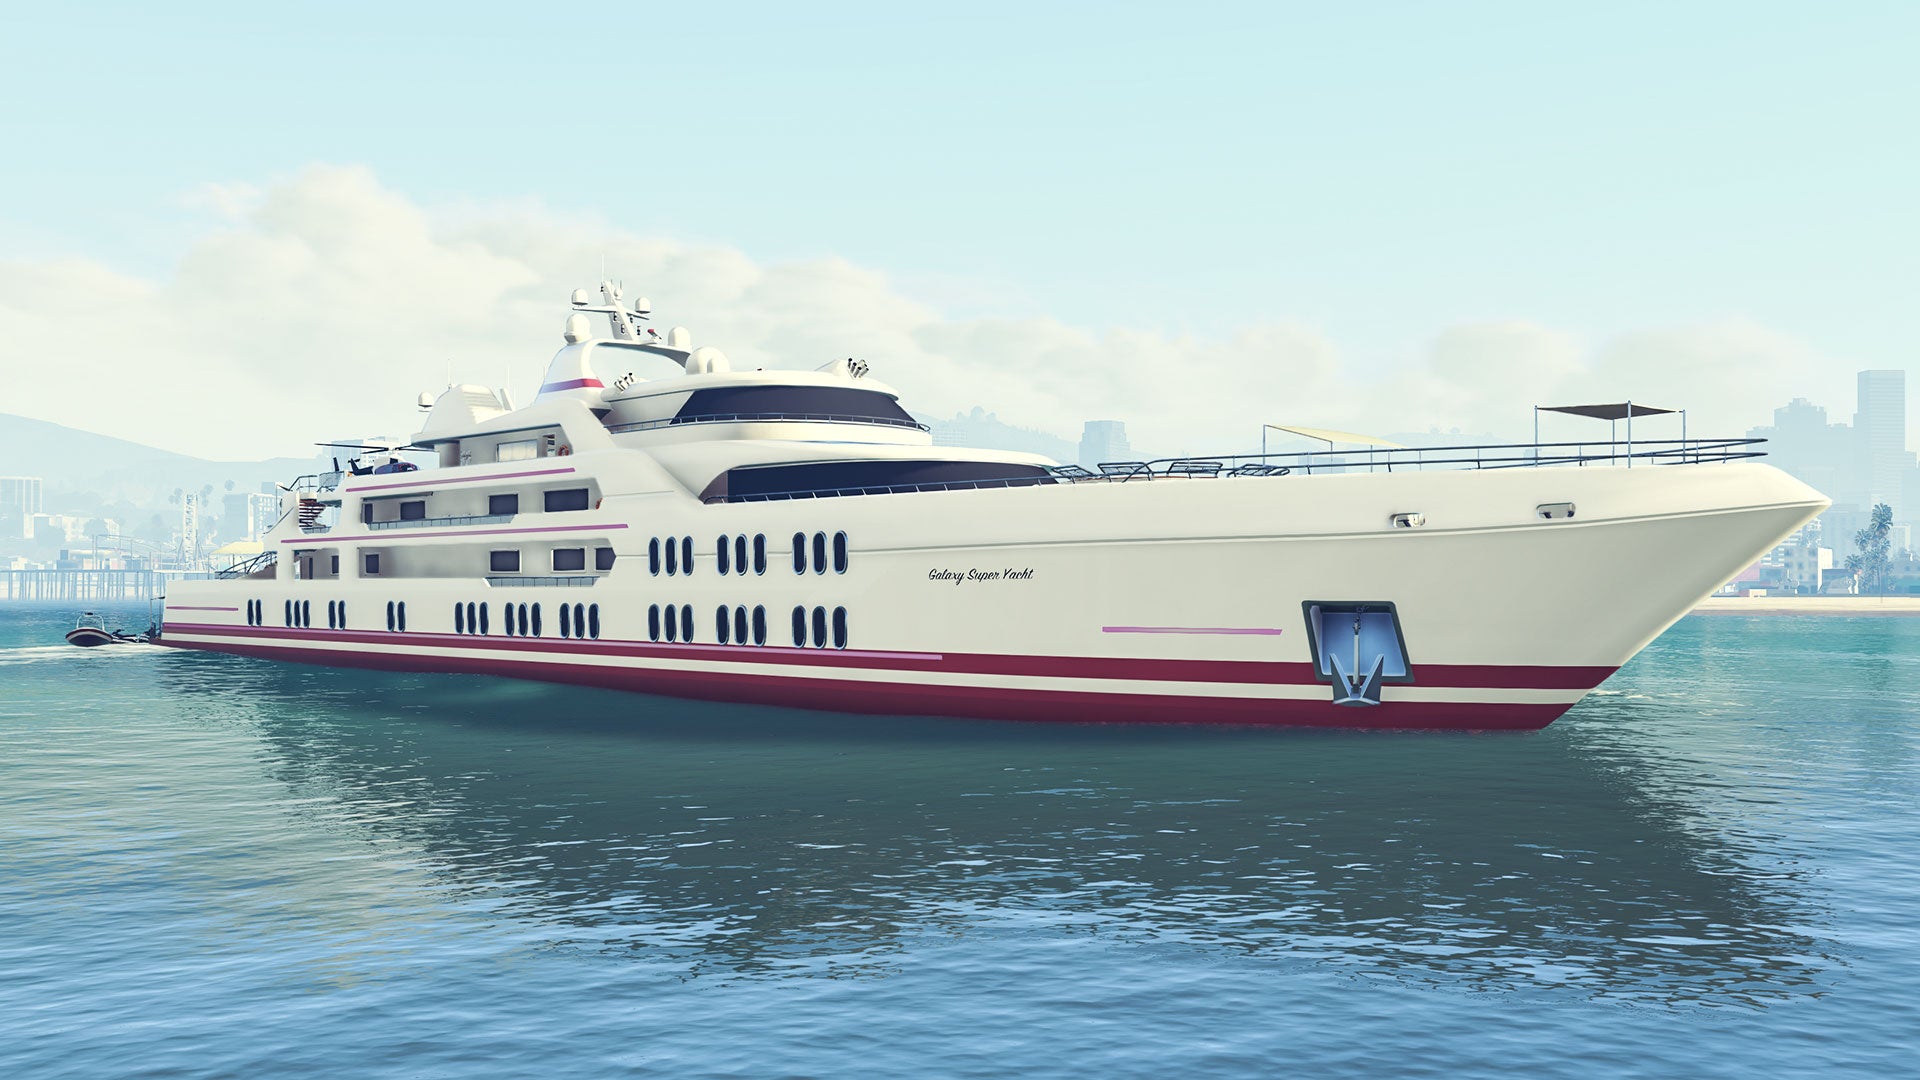 GTA Online players earn double in Galaxy Super Yacht missions this week VG247